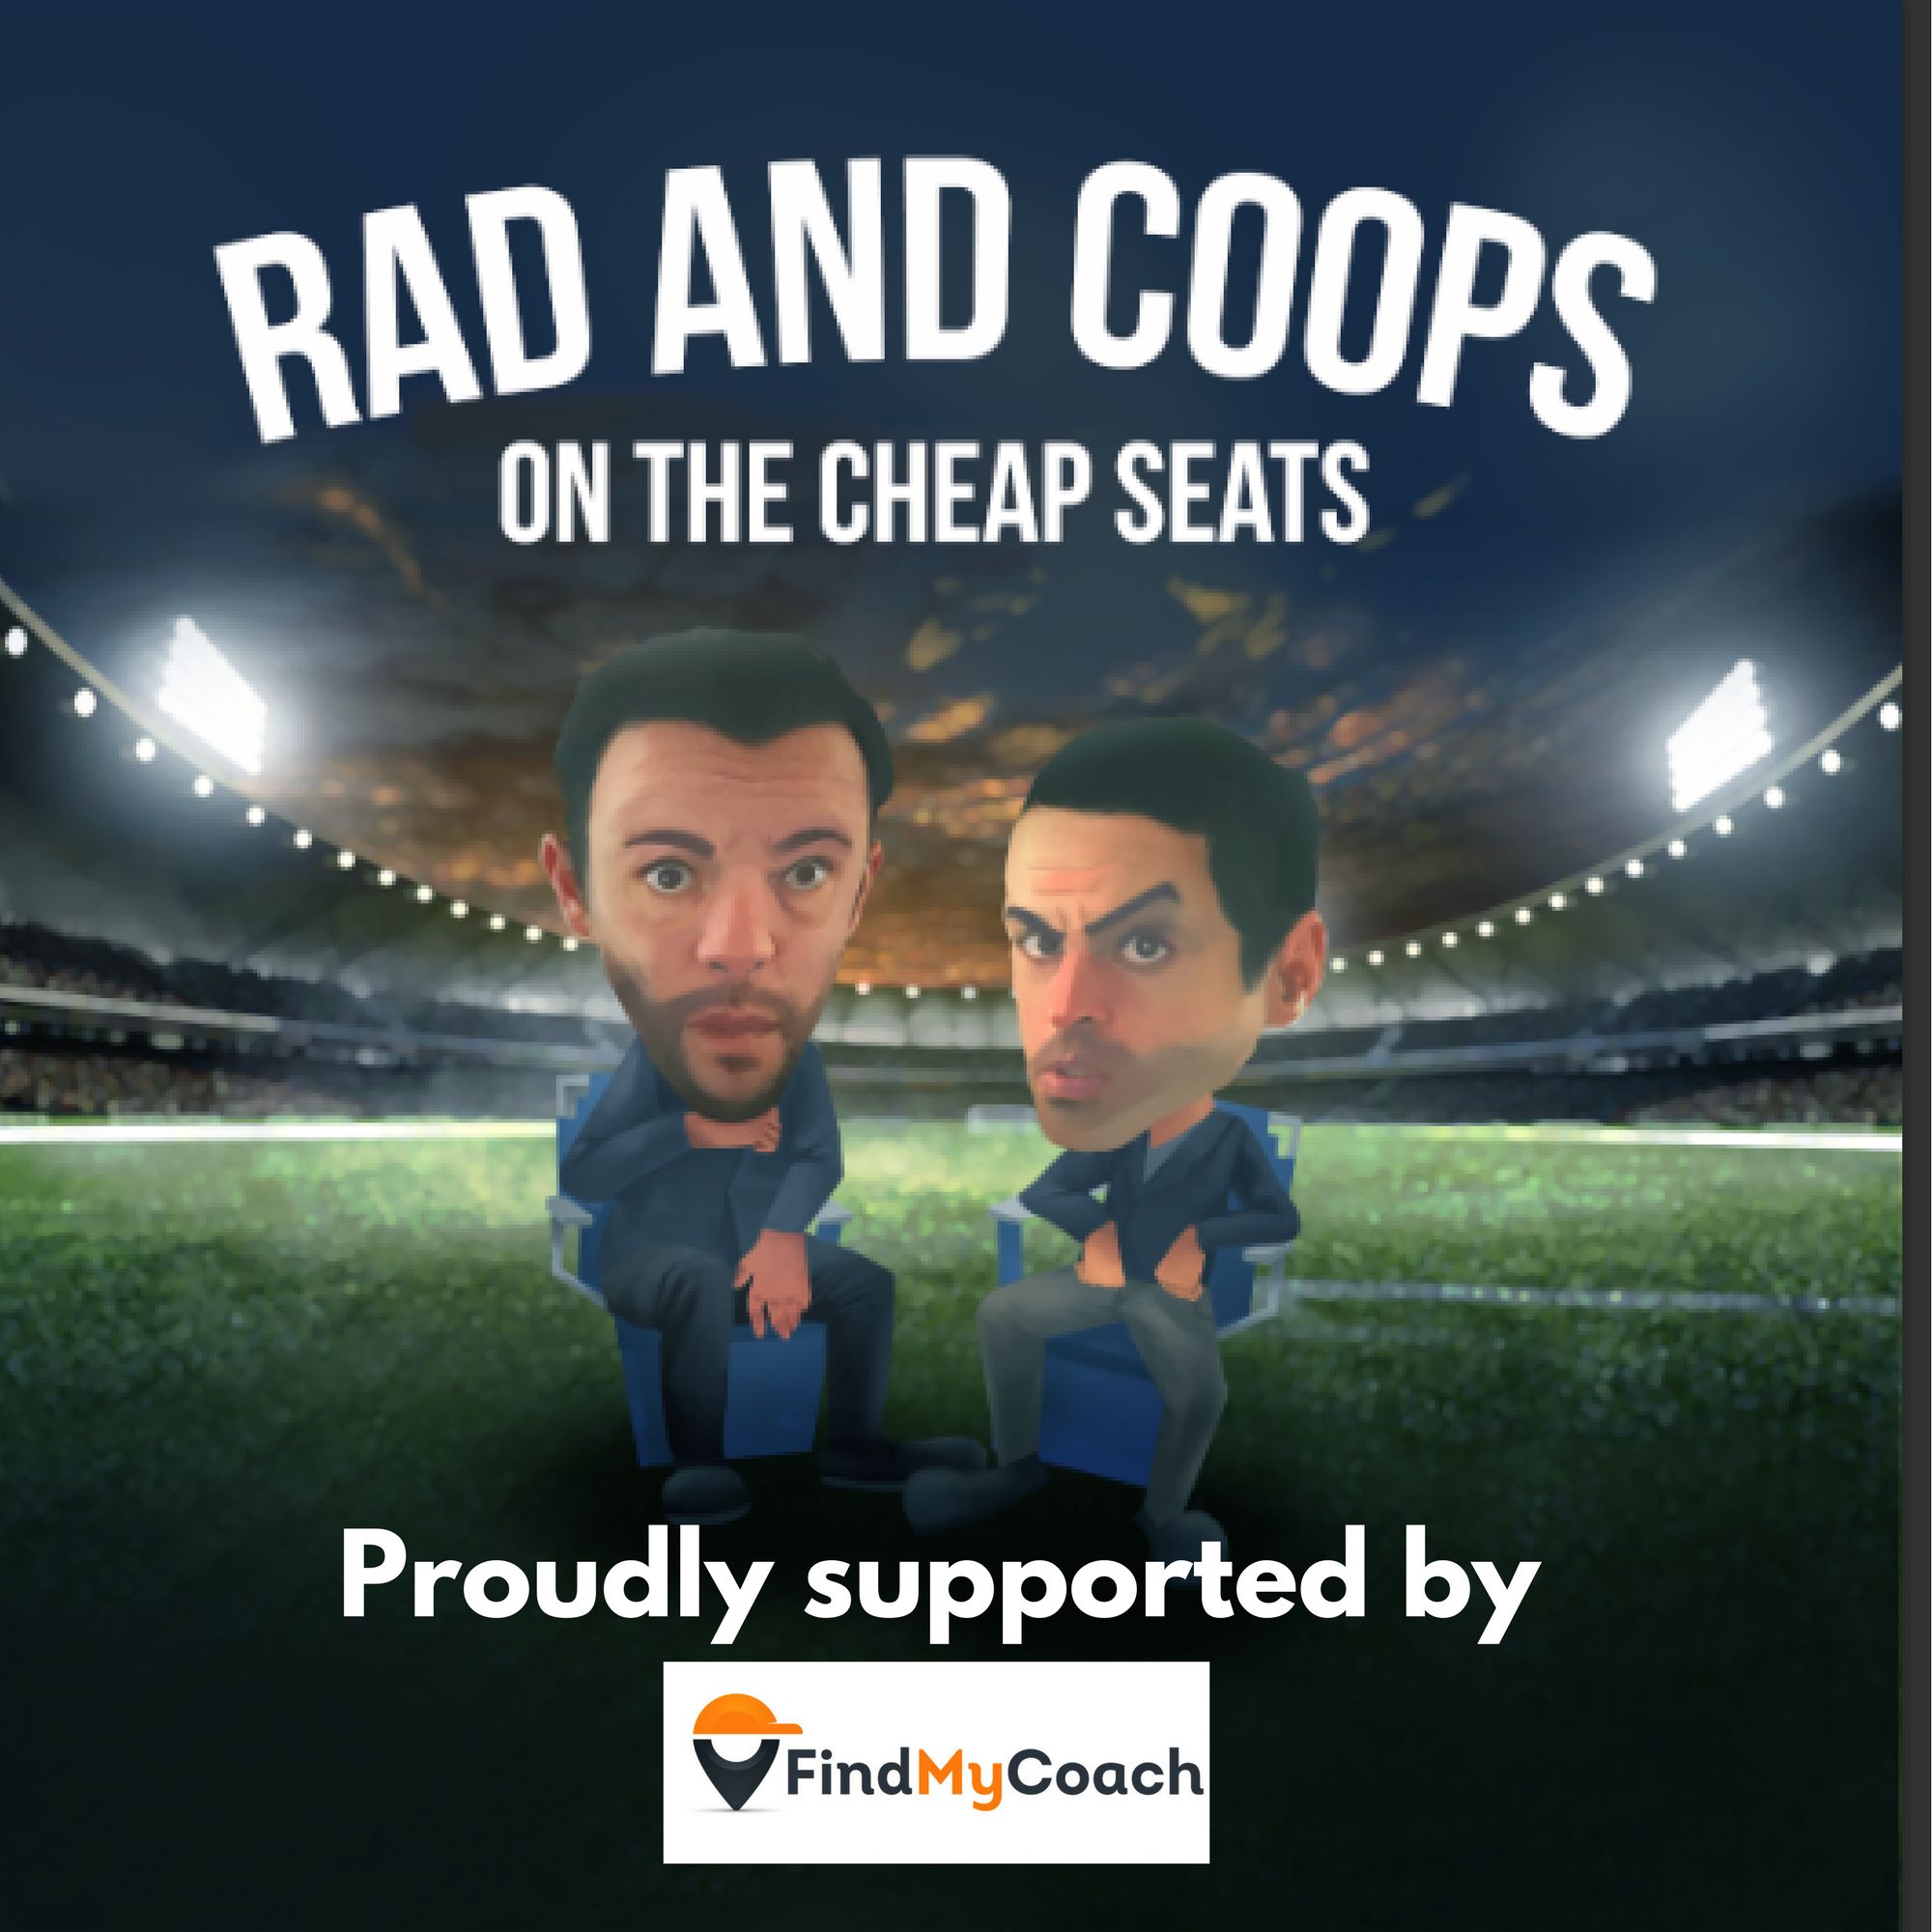 Rad and Coops on The Cheap Seats